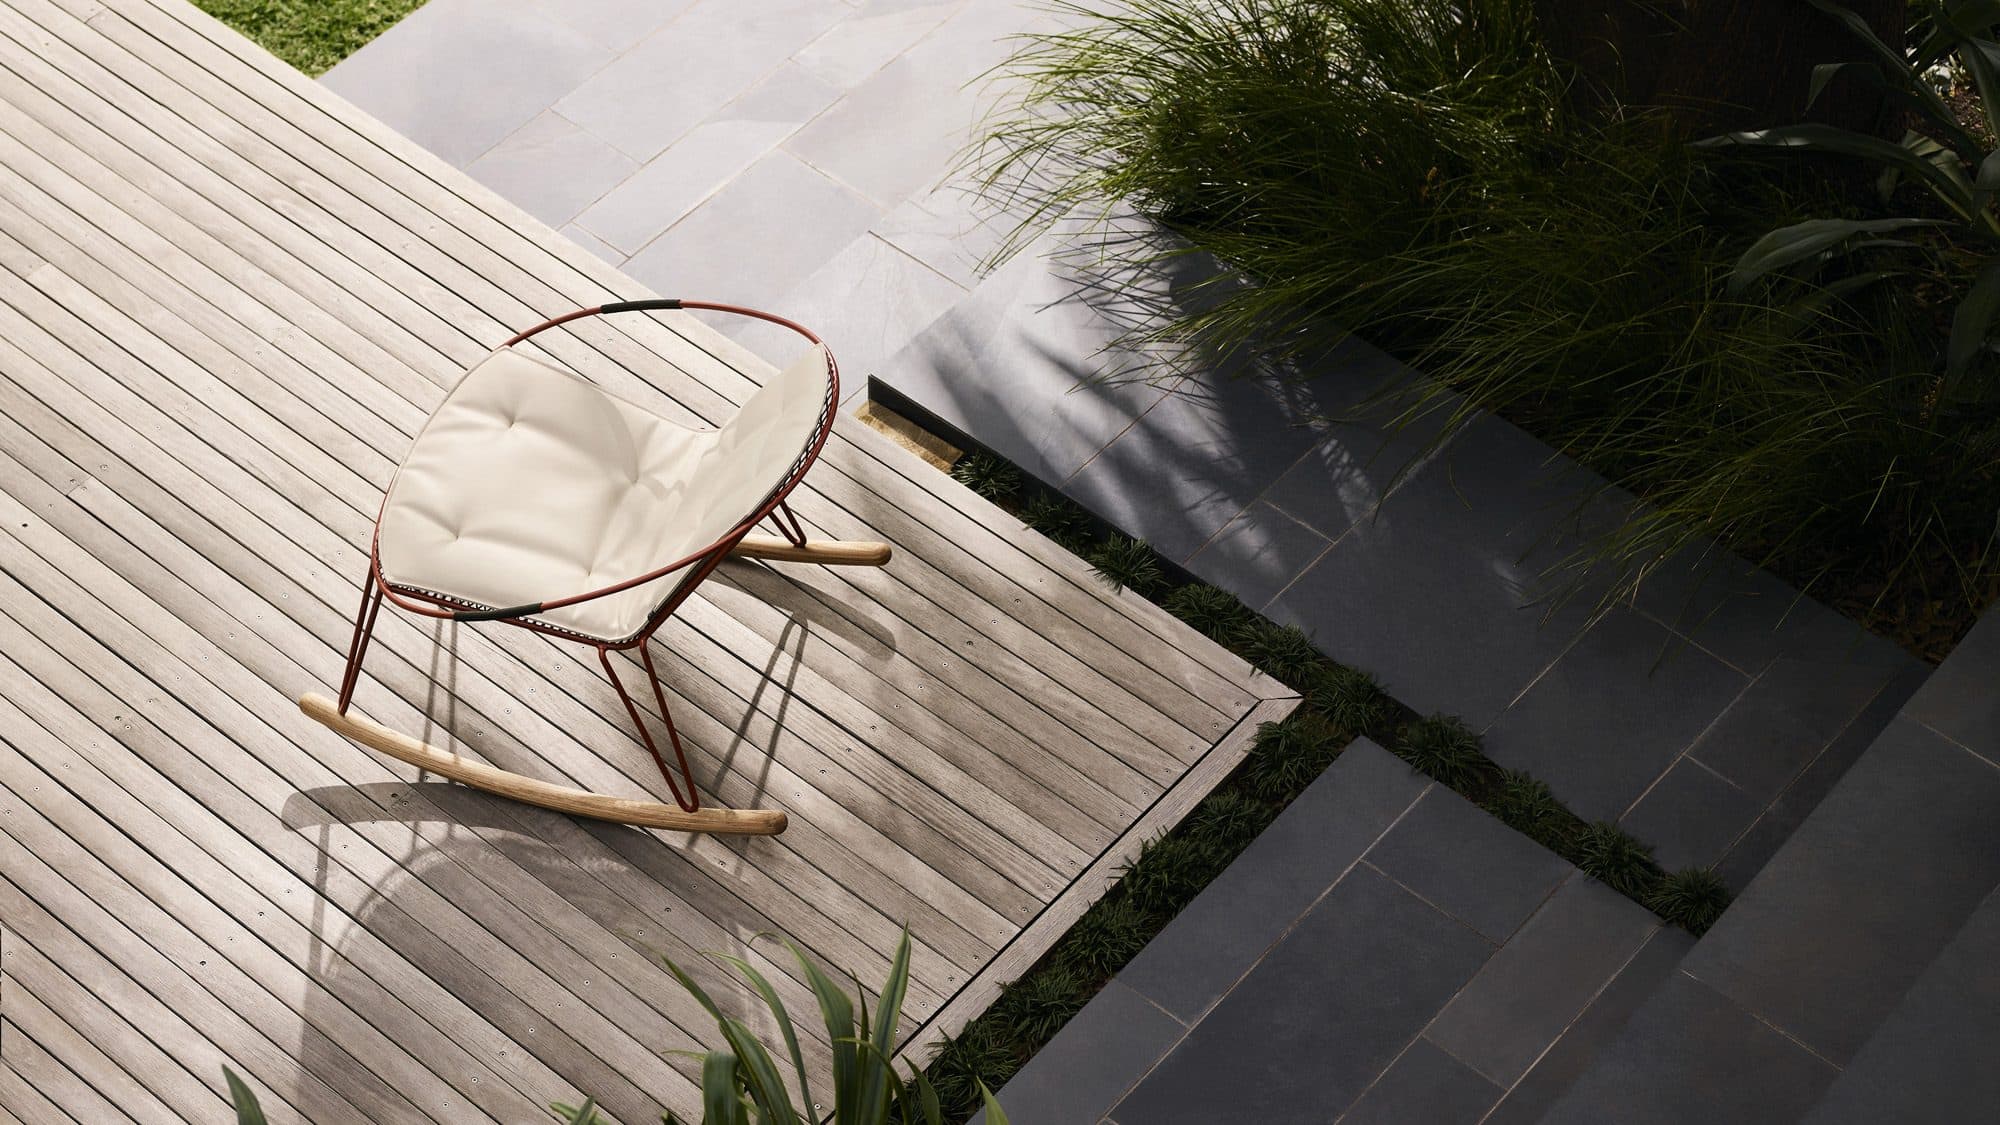 the Volley Rocker - a modern outdoor rocking chair with a distinct mid-century modern vibe designed by Adam Goodrum.